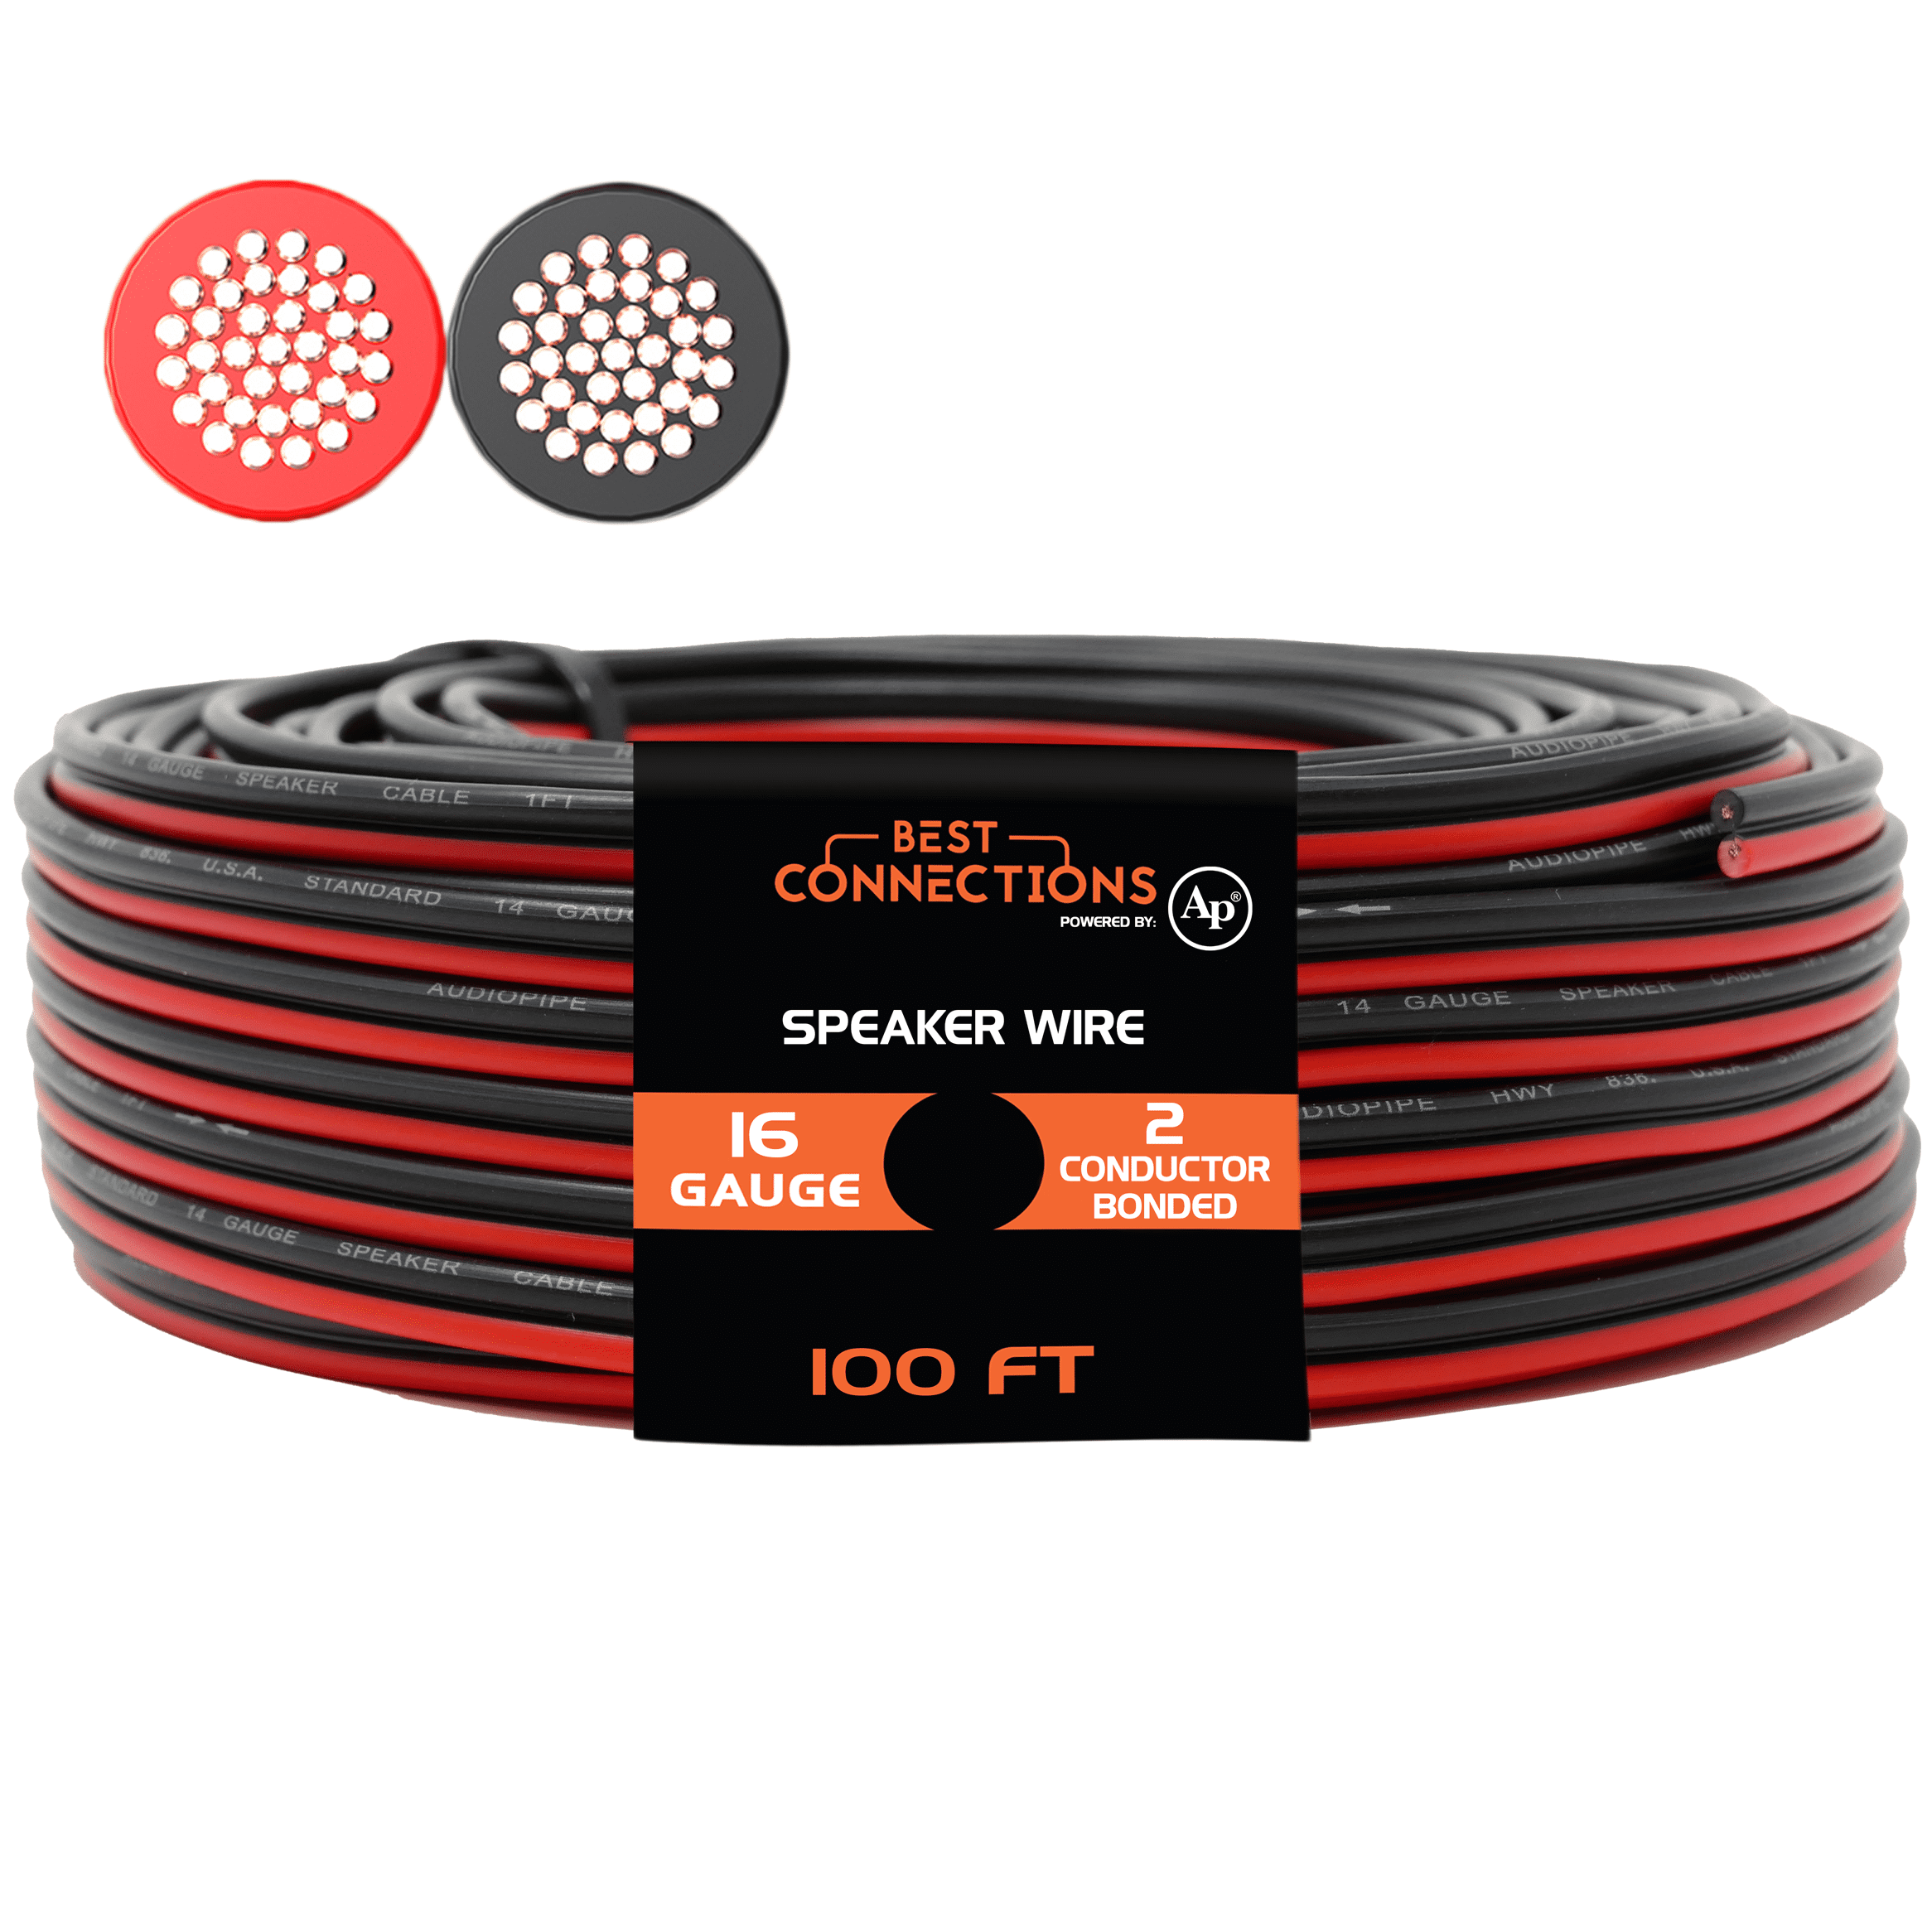 GearIT 16 Gauge Power Ground Electrical Wire Copper Clad Aluminum Sing